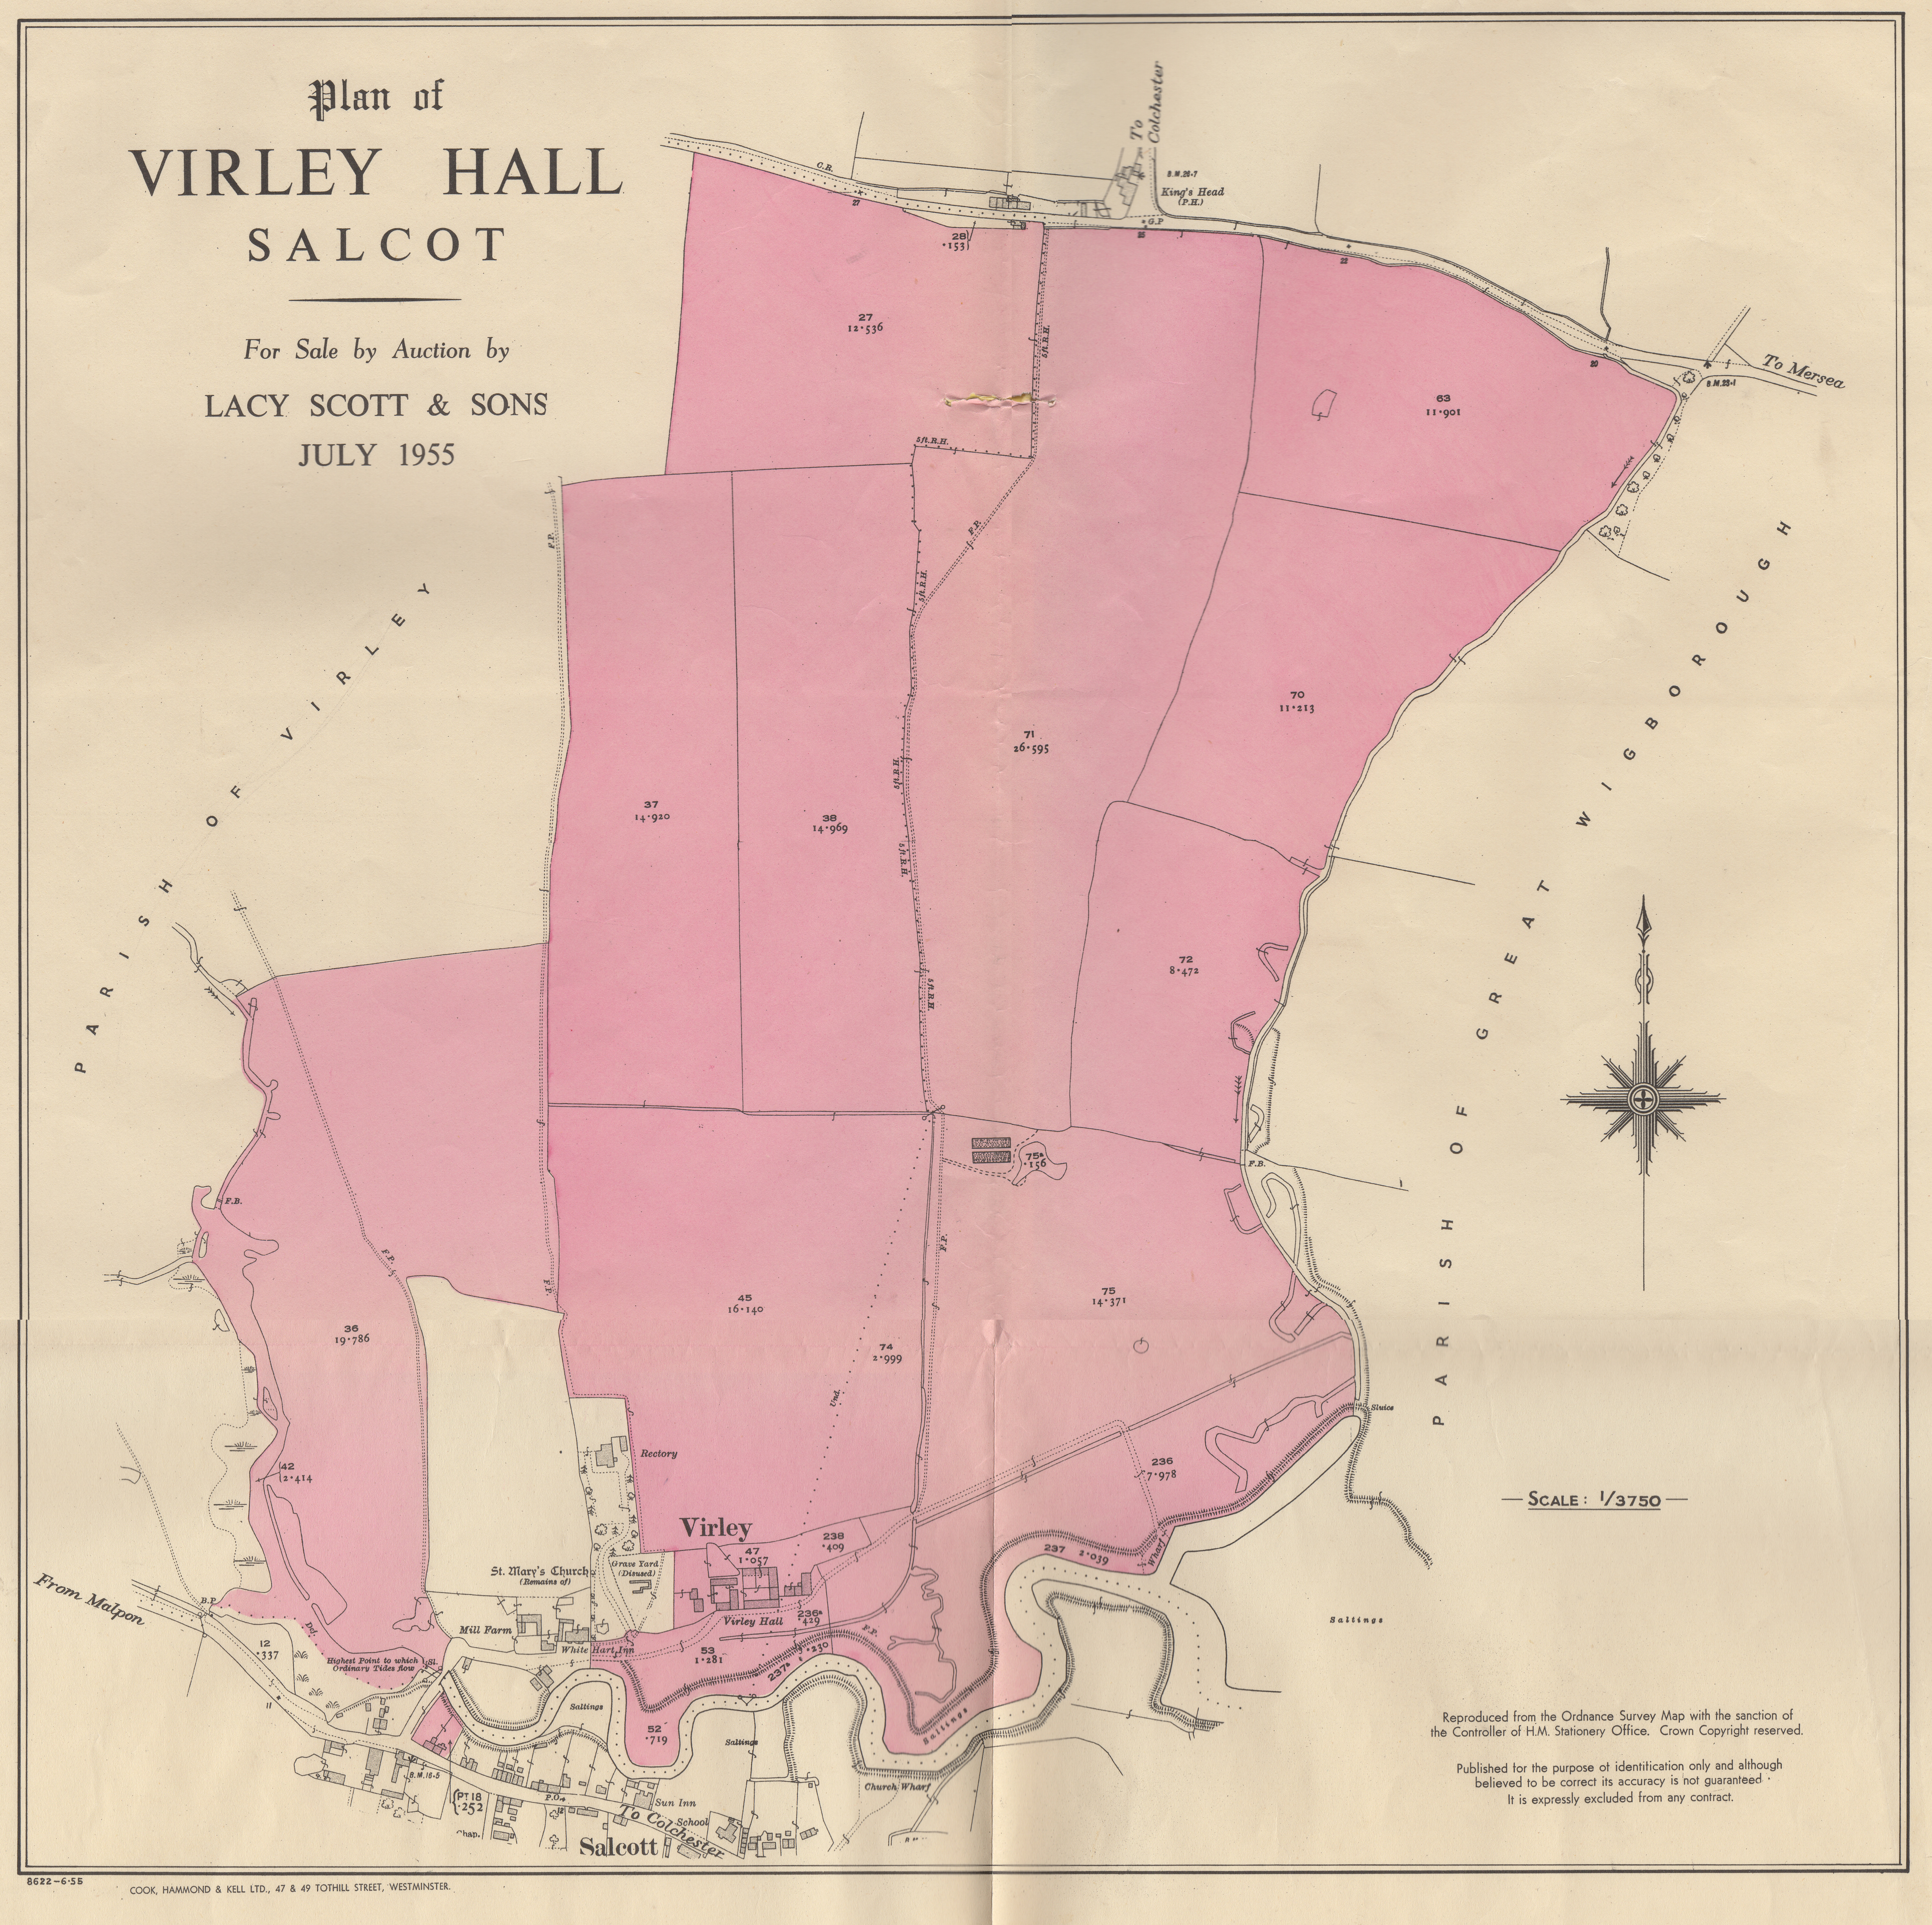 ID AD01_007 Virley Hall Farm Sale, Salcot, Essex.
<br>Plan of Virley Hall, for sale by ...